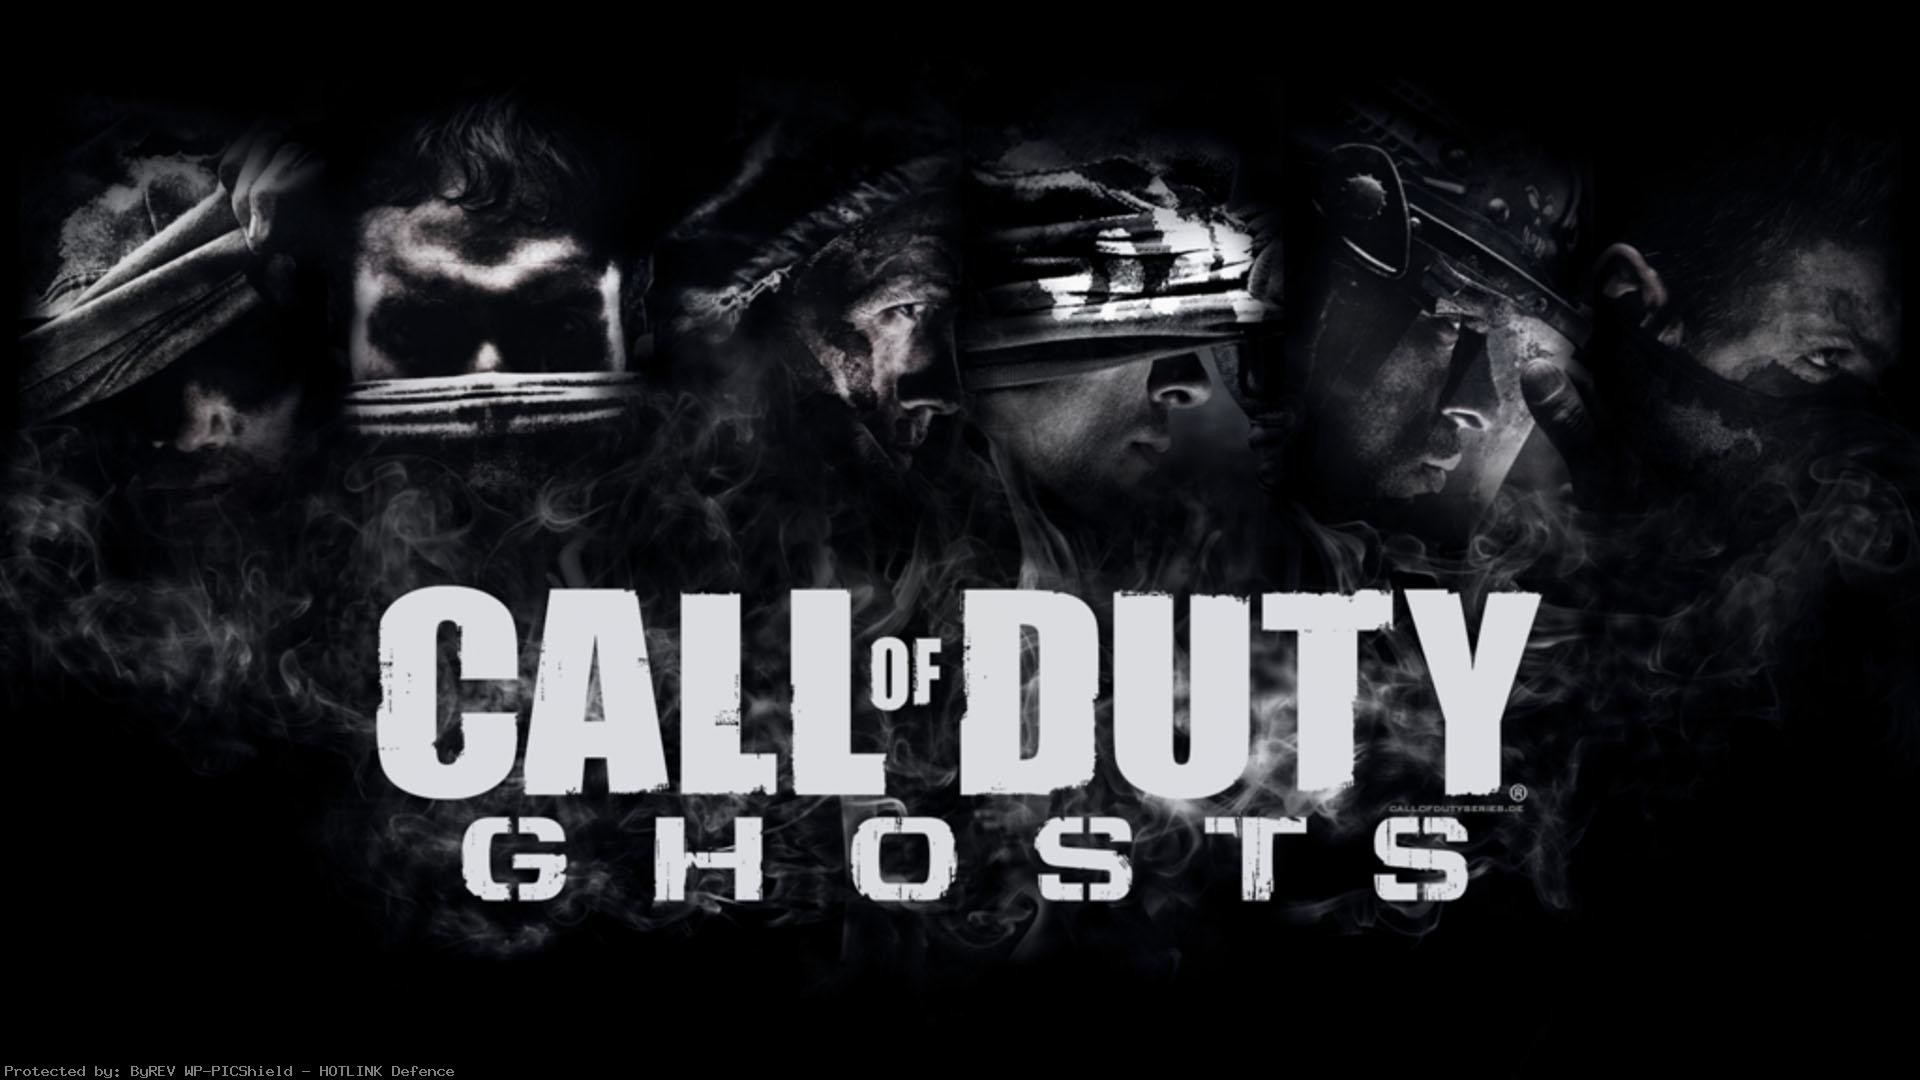 1920x1080 call-of-duty-ghosts-Pesquisa-Google-wallpaper-wp6004025